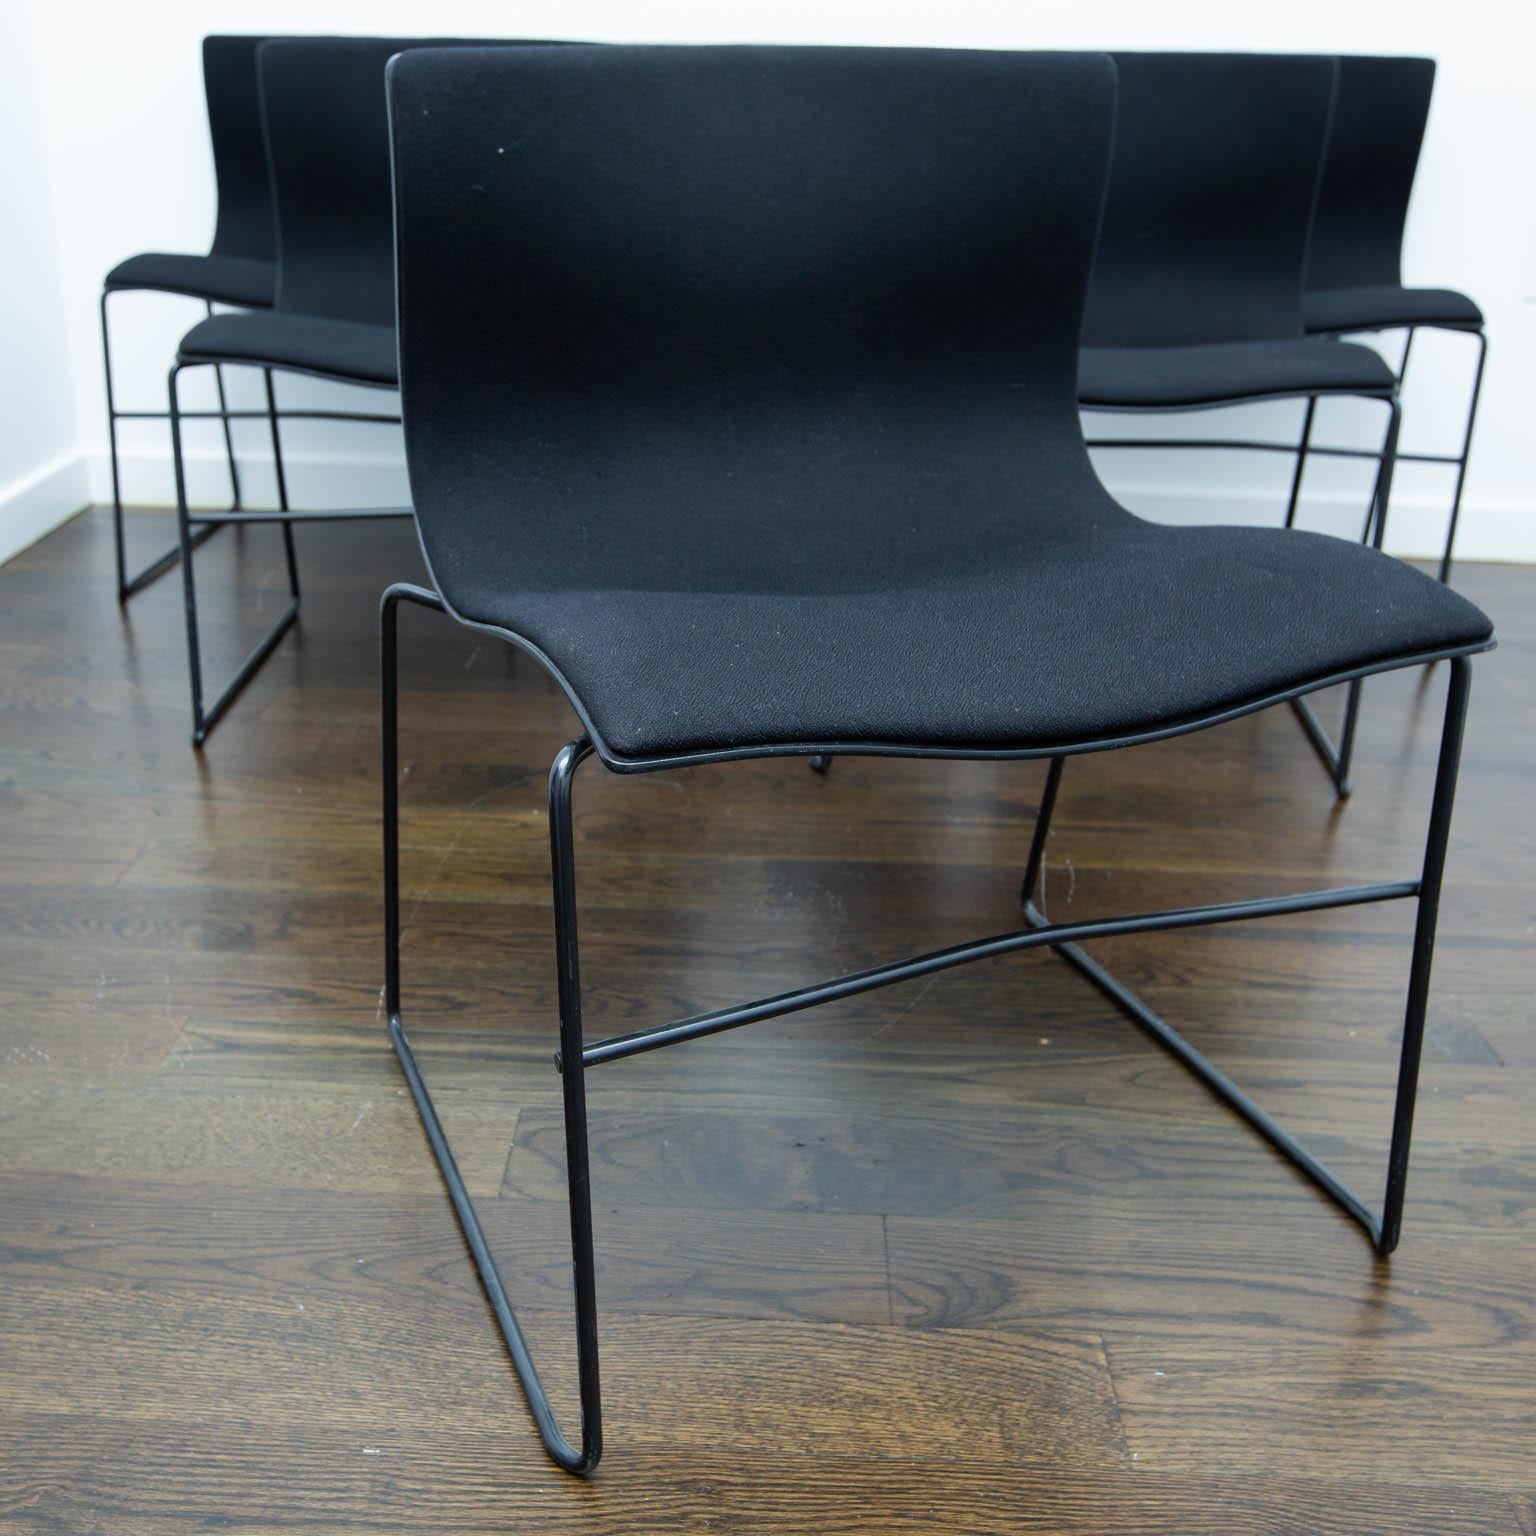 One of the most comfortable chairs I've ever sat in. The ergonomically-designed upholstered steel backs hug your back. These are the relatively rare upholstered versions of a design by Massimo Vignelli for Knoll Studios in 1985. We have several sets